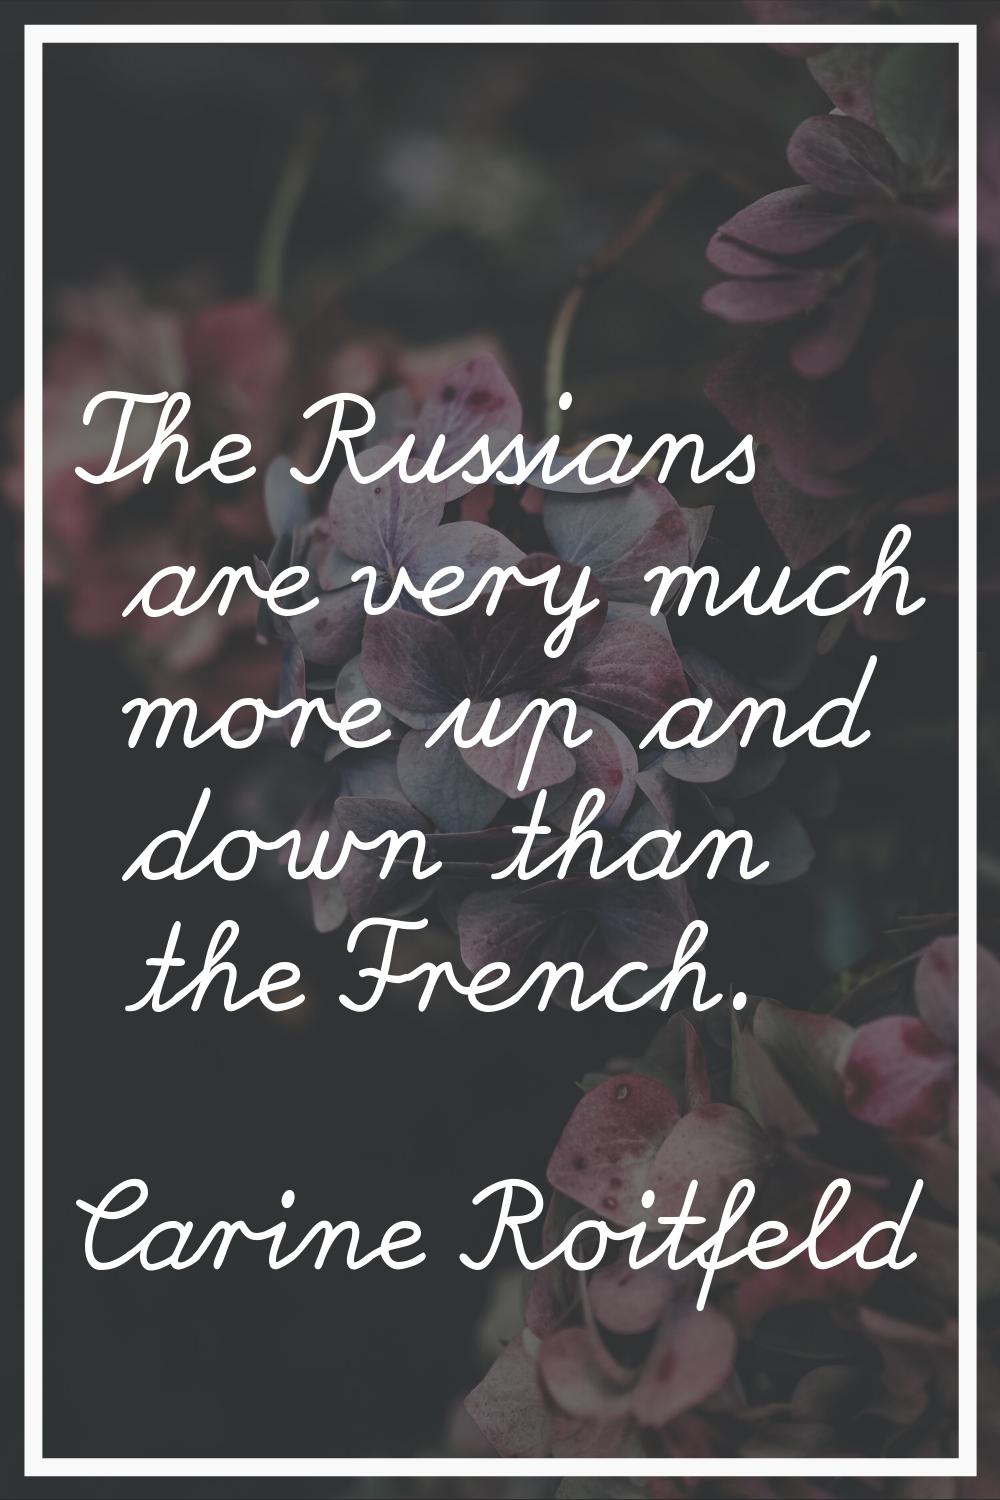 The Russians are very much more up and down than the French.